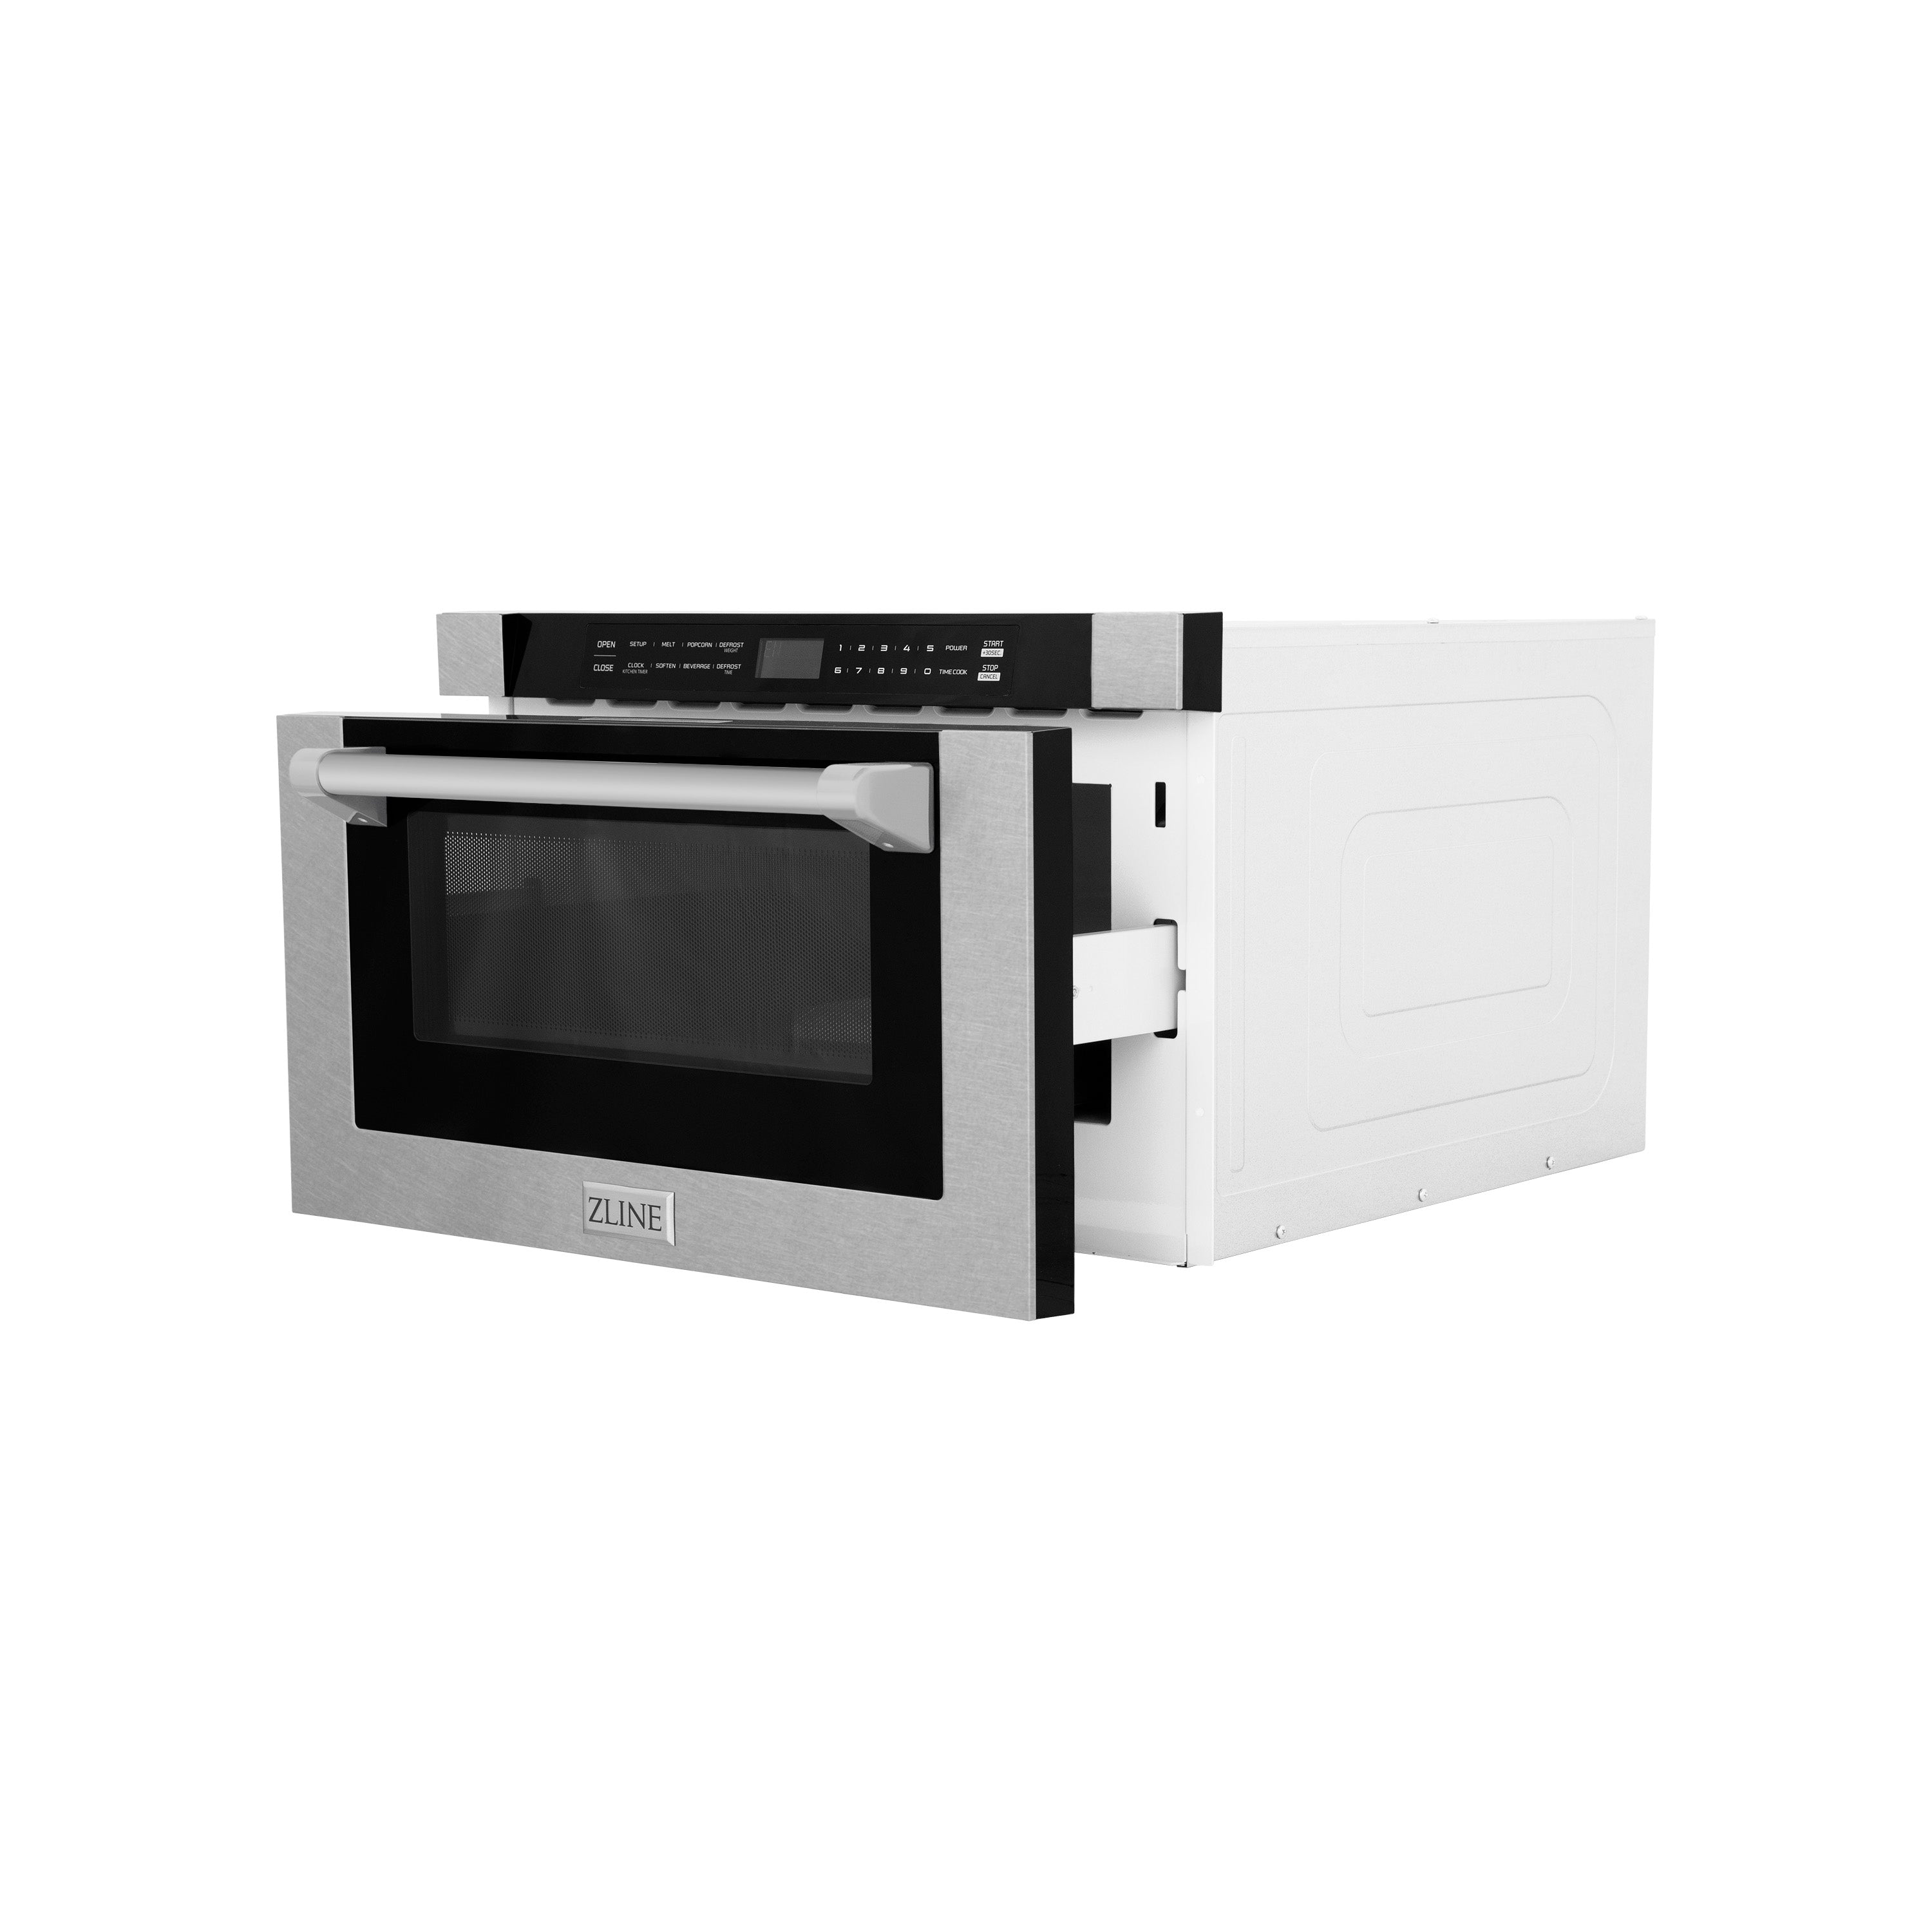 ZLINE 24 in. 1.2 cu. ft. Built-in Microwave Drawer with a Traditional Handle in DuraSnow Stainless Steel (MWD-1-SS-H) Side View Drawer Open